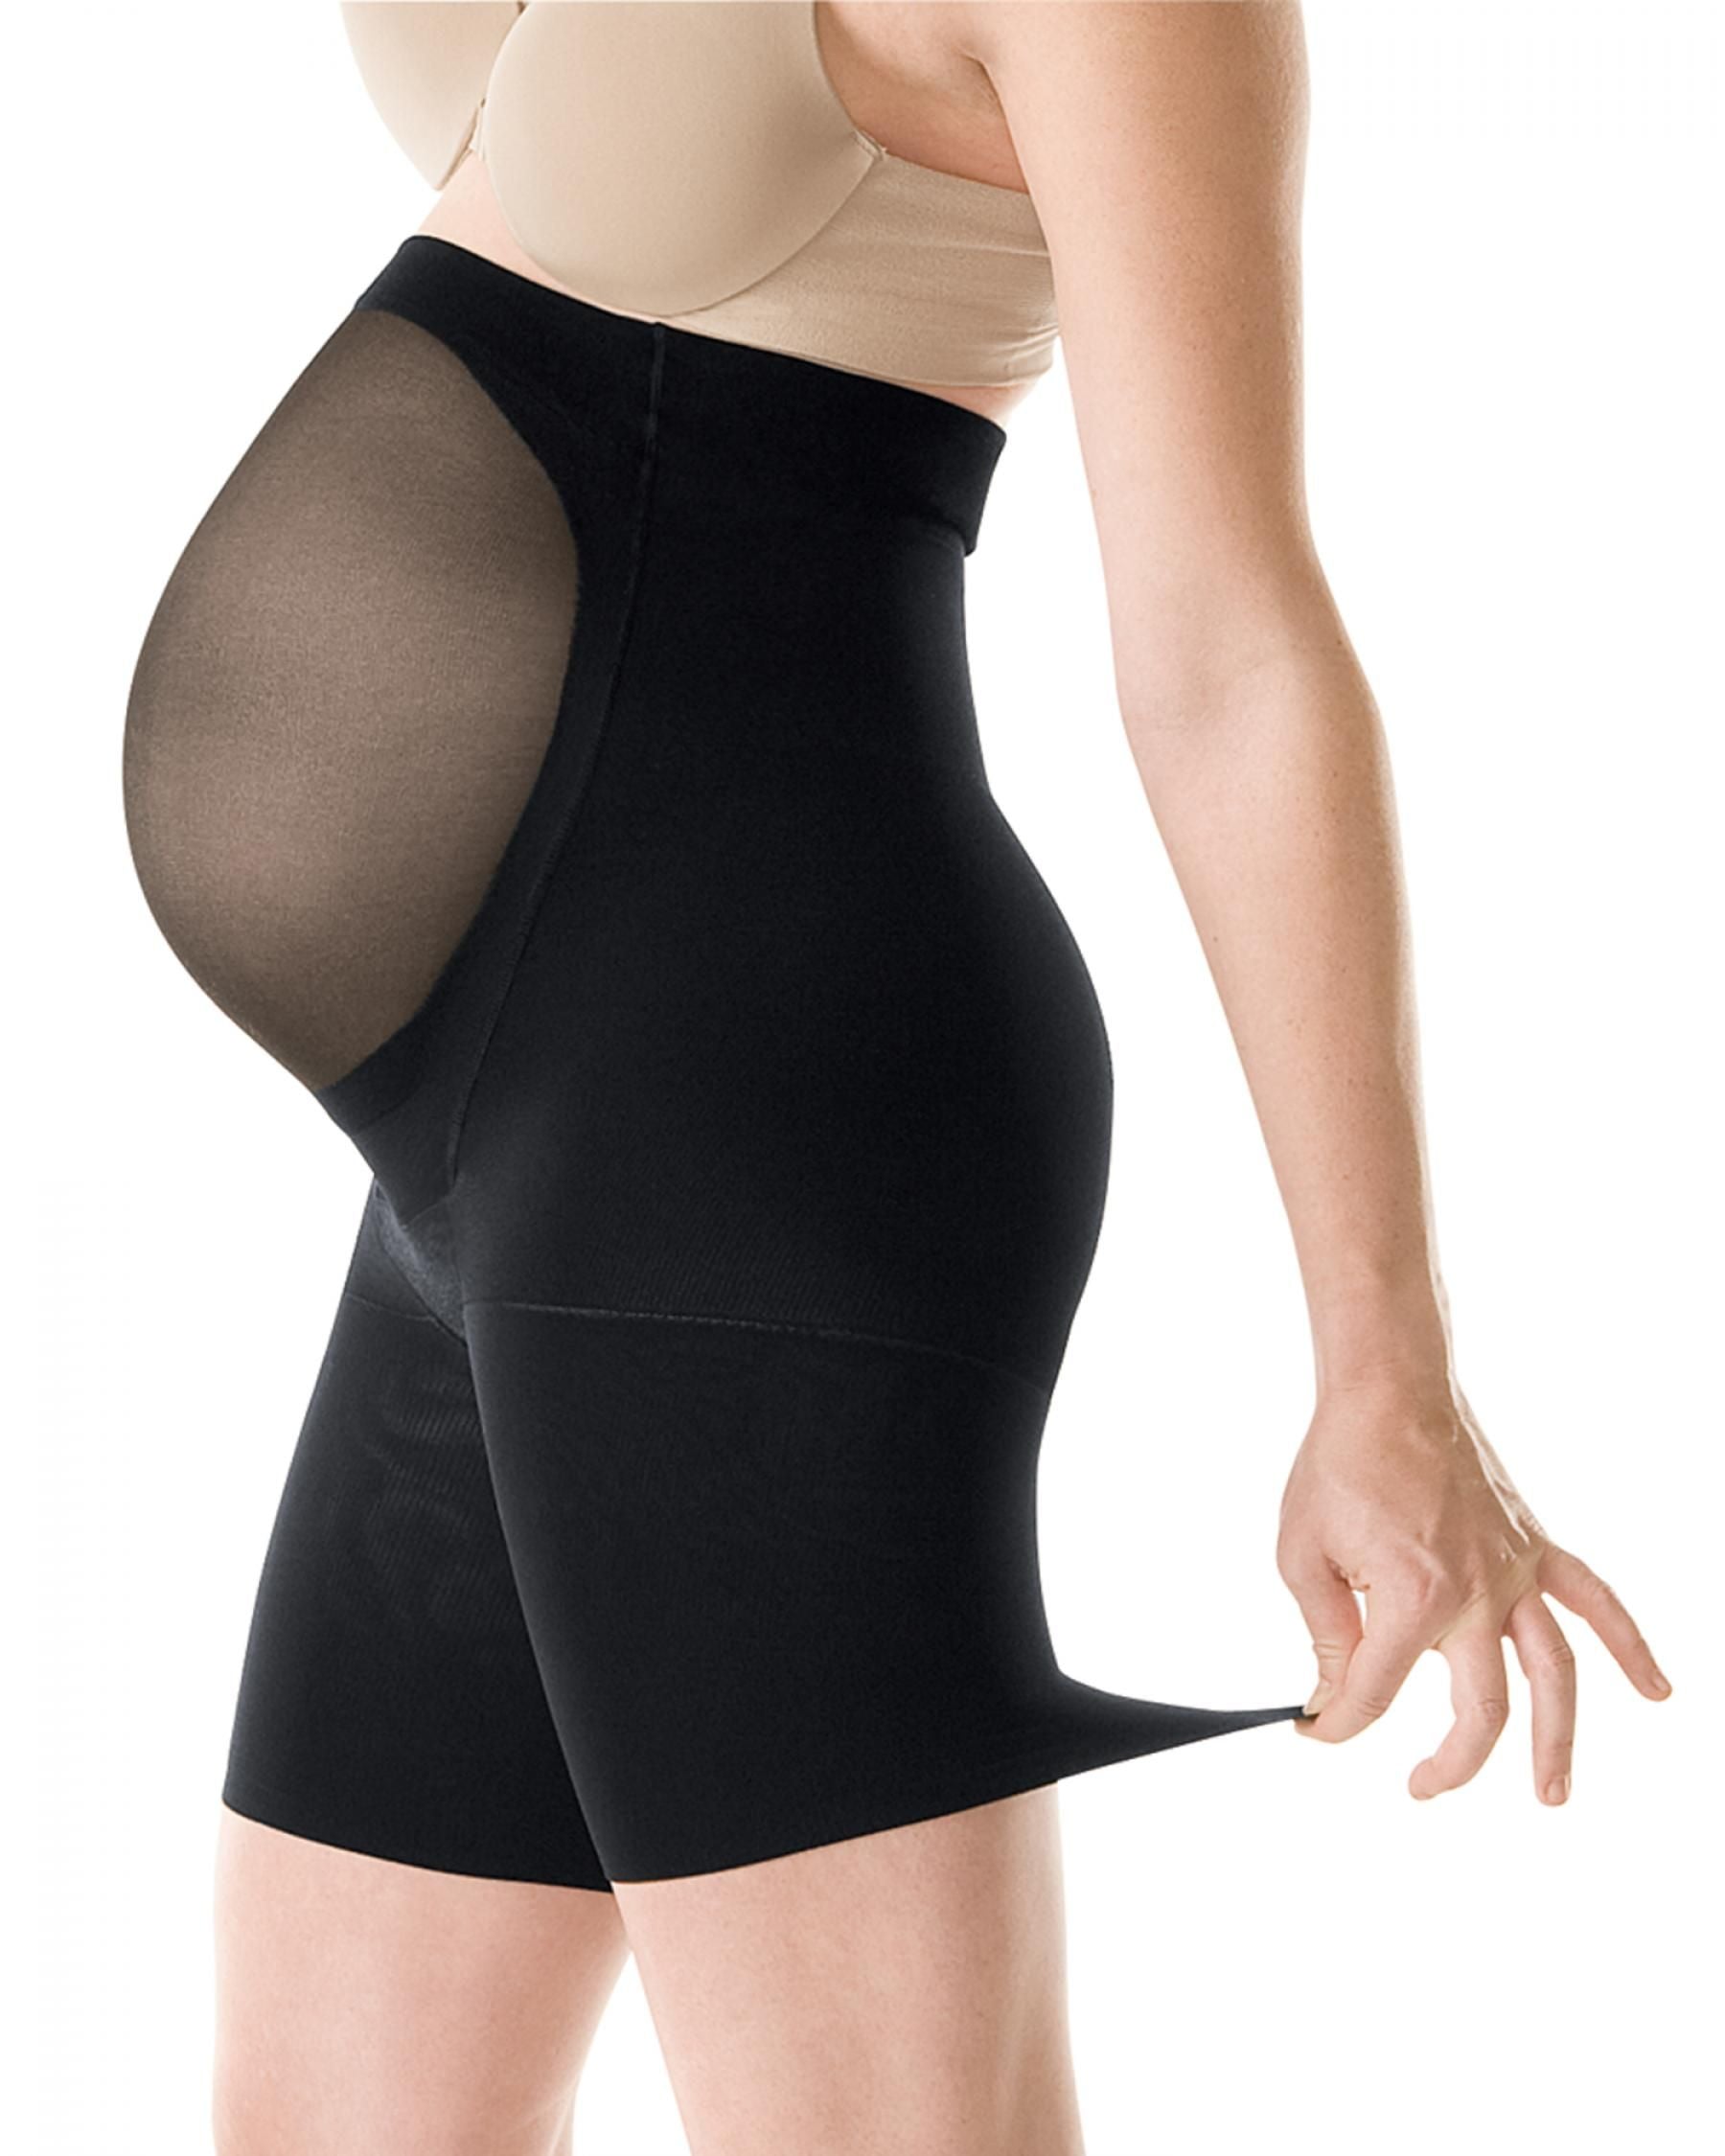 Undetectable Step-In Mid-Thigh Body Shaper - Black – Mums and Bumps